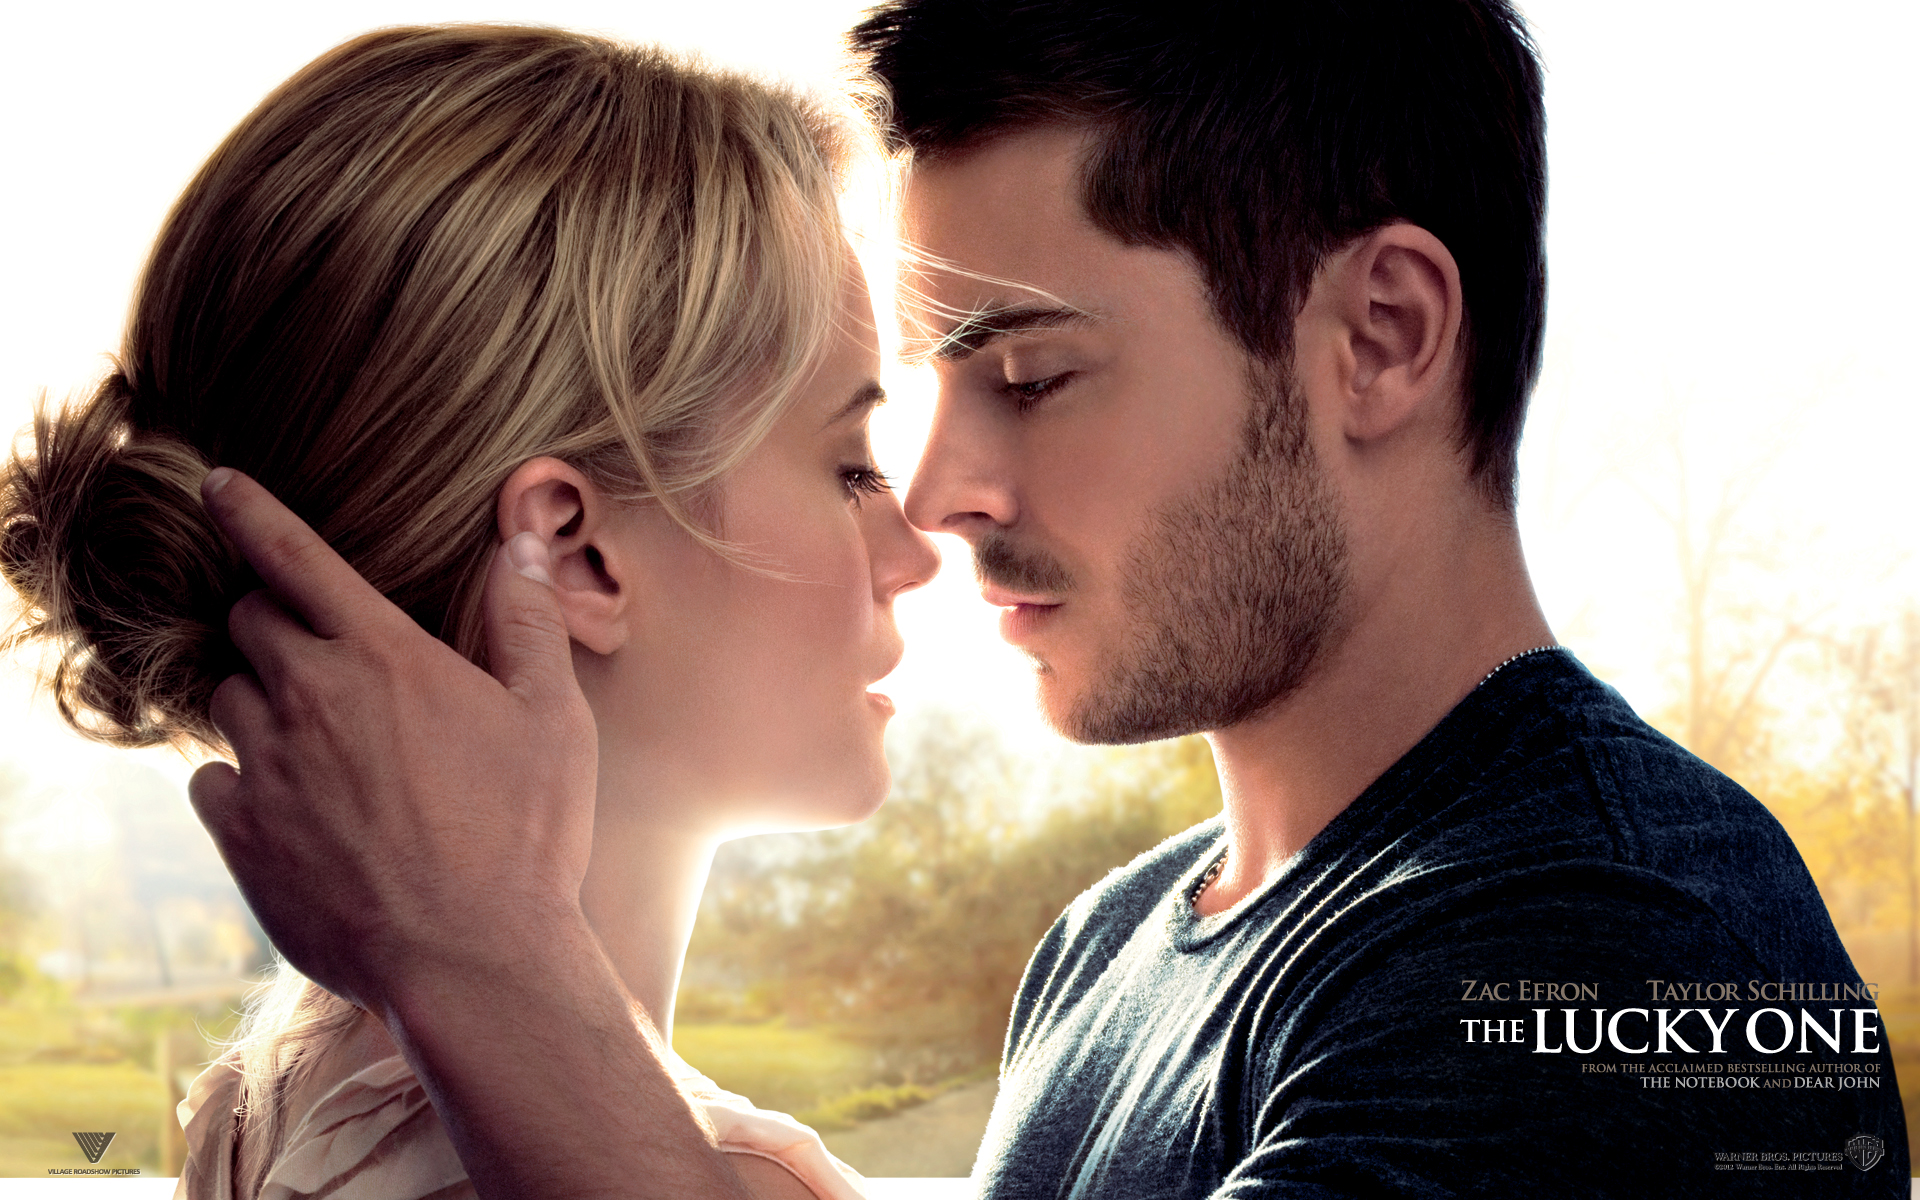 Taylor Schilling The Lucky One Zac Efron 1920x1200